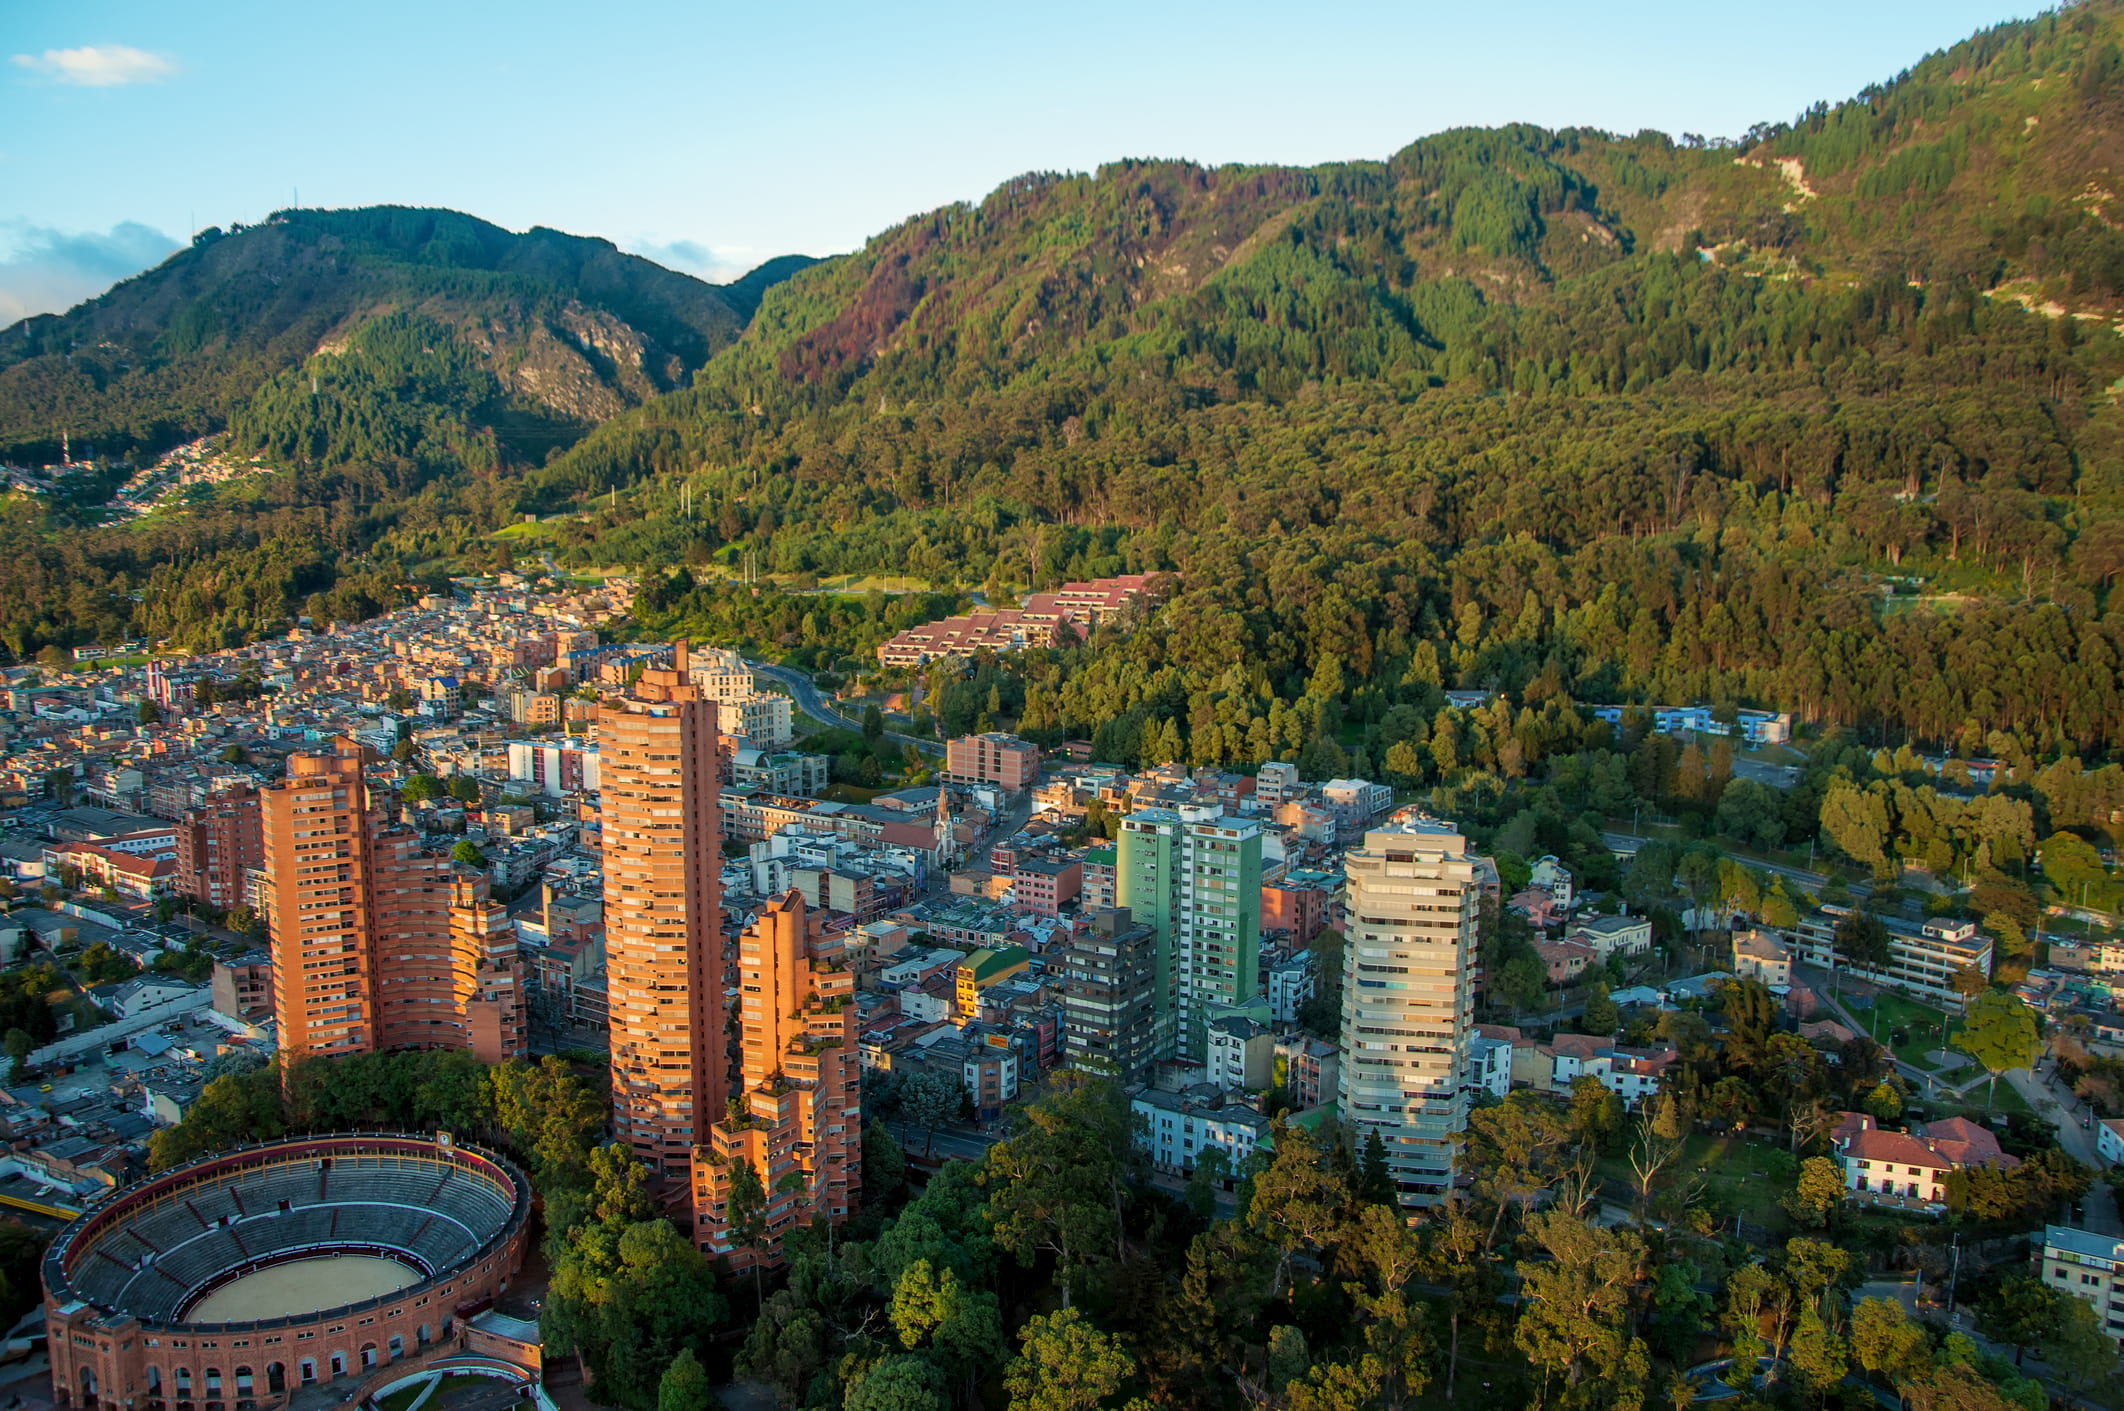 Image of Bogota from an aerial perspective